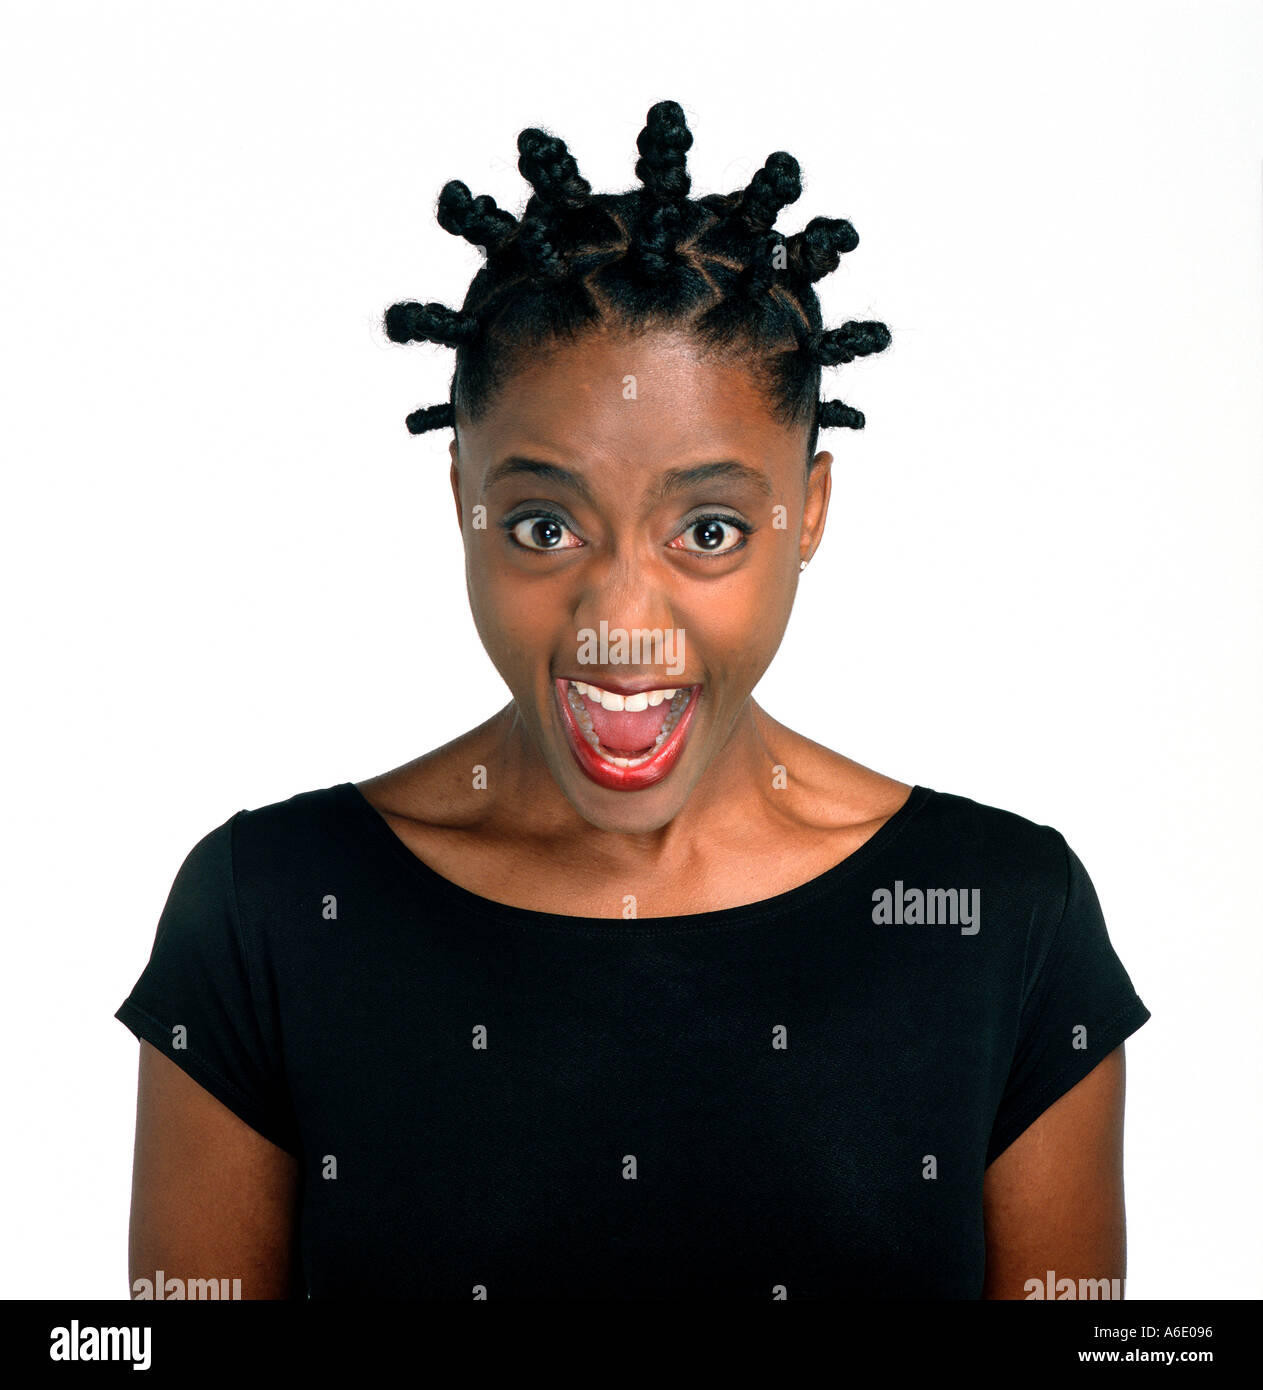 African american woman with cornrow hair screams in portrait. Stock Photo